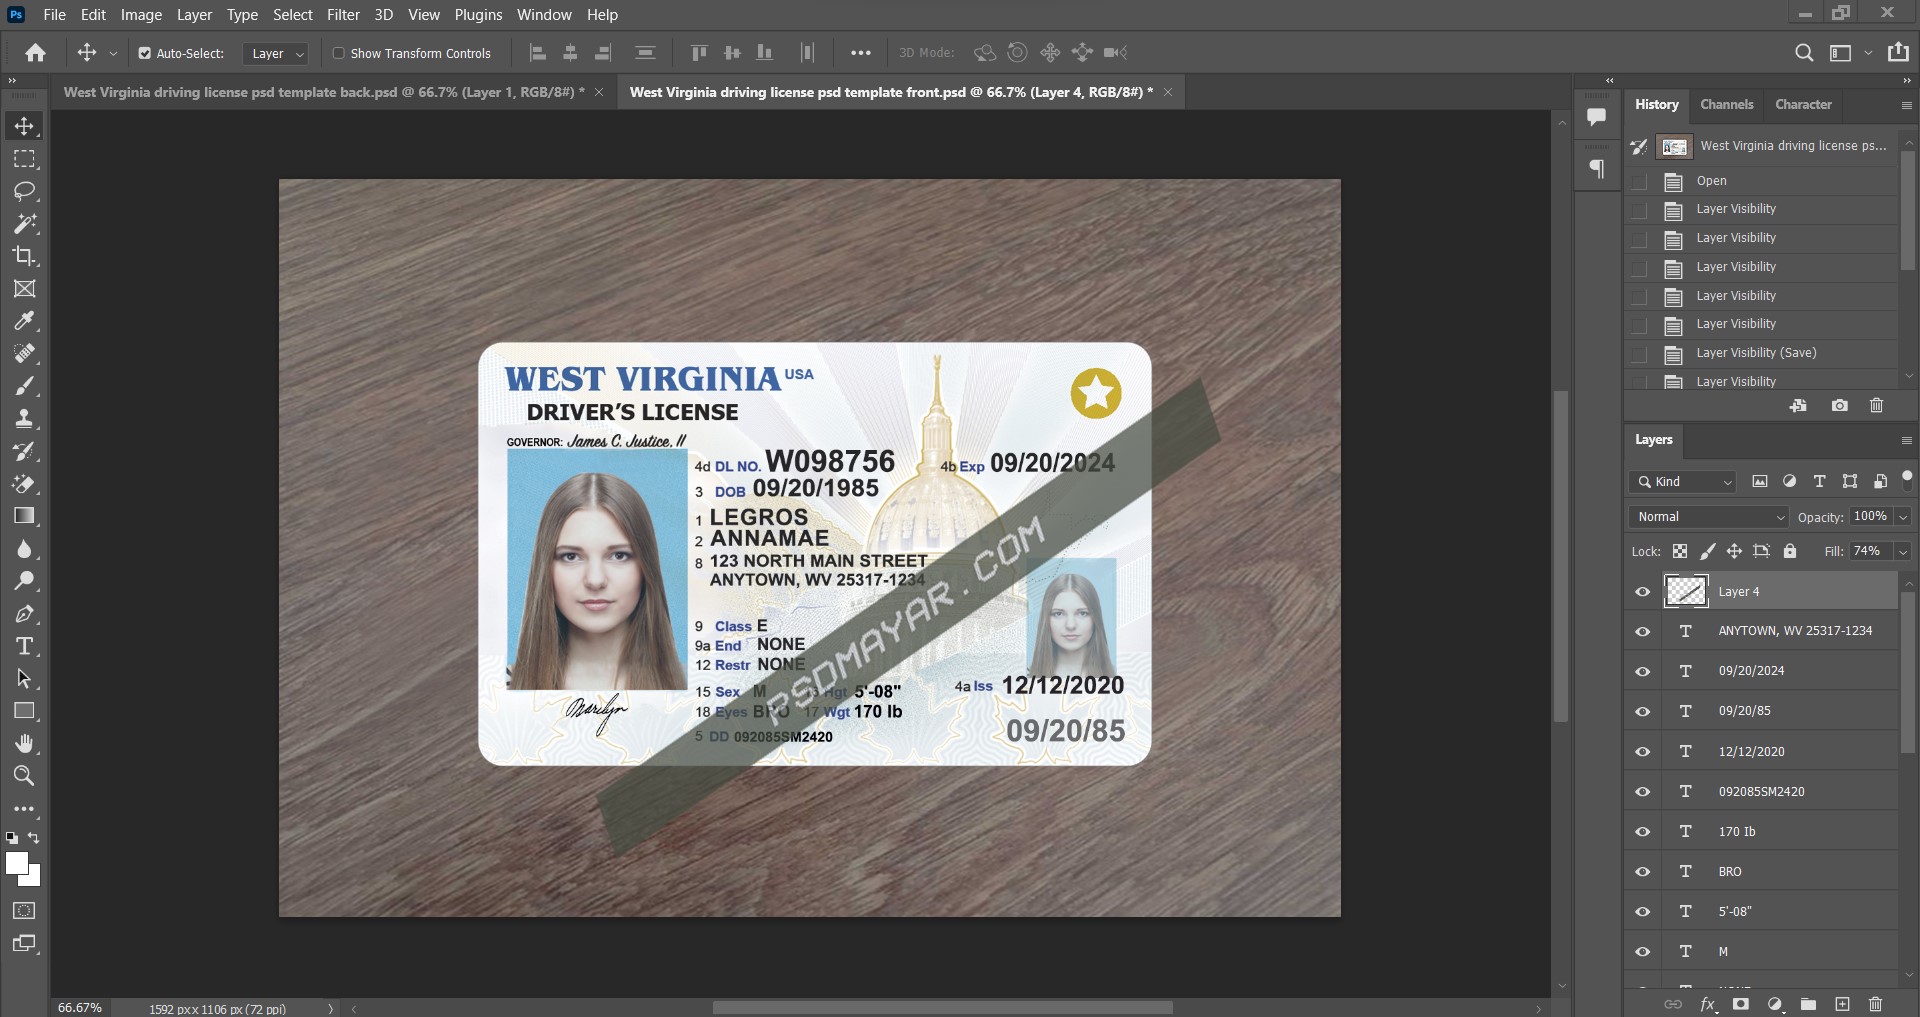 West Virginia driving license psd template